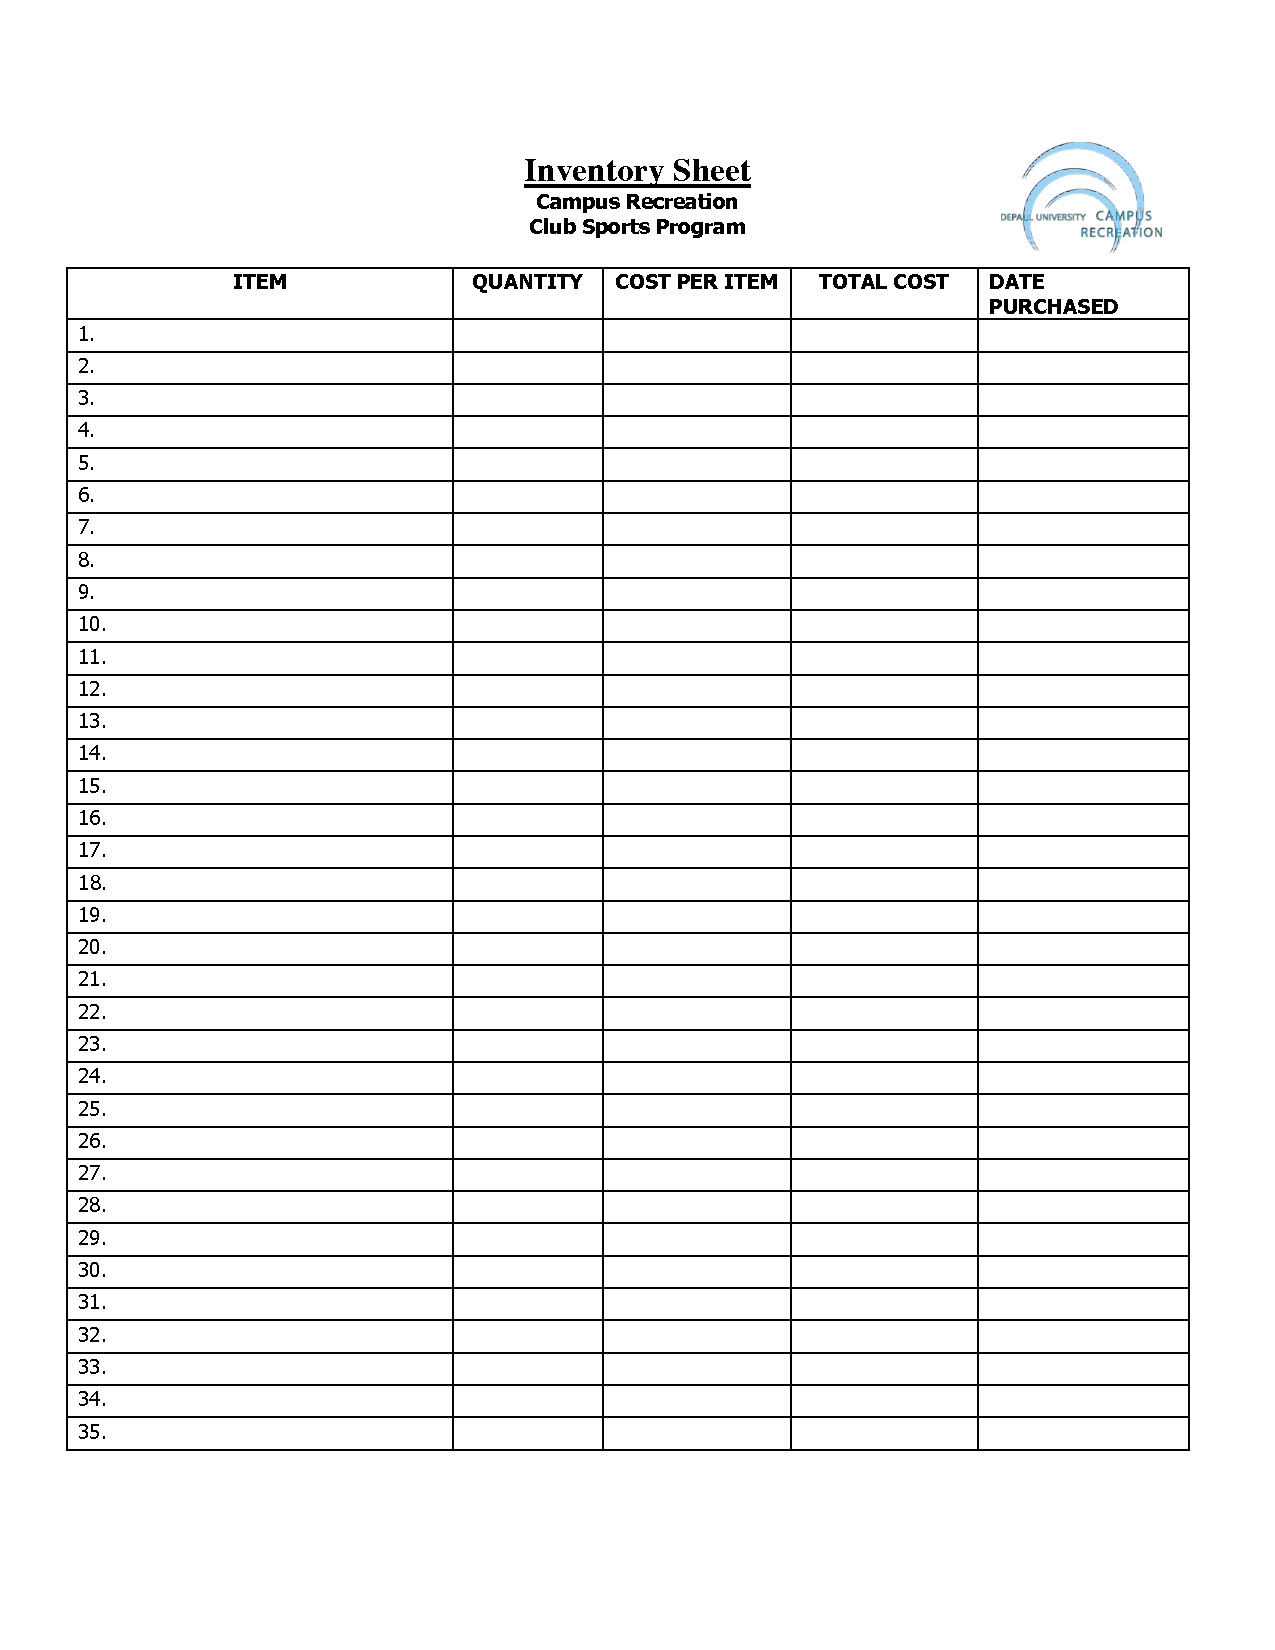 Free Printable Inventory Sheets | Inventory Sheet - Doc | Ideas - Free Printable Inventory Sheets